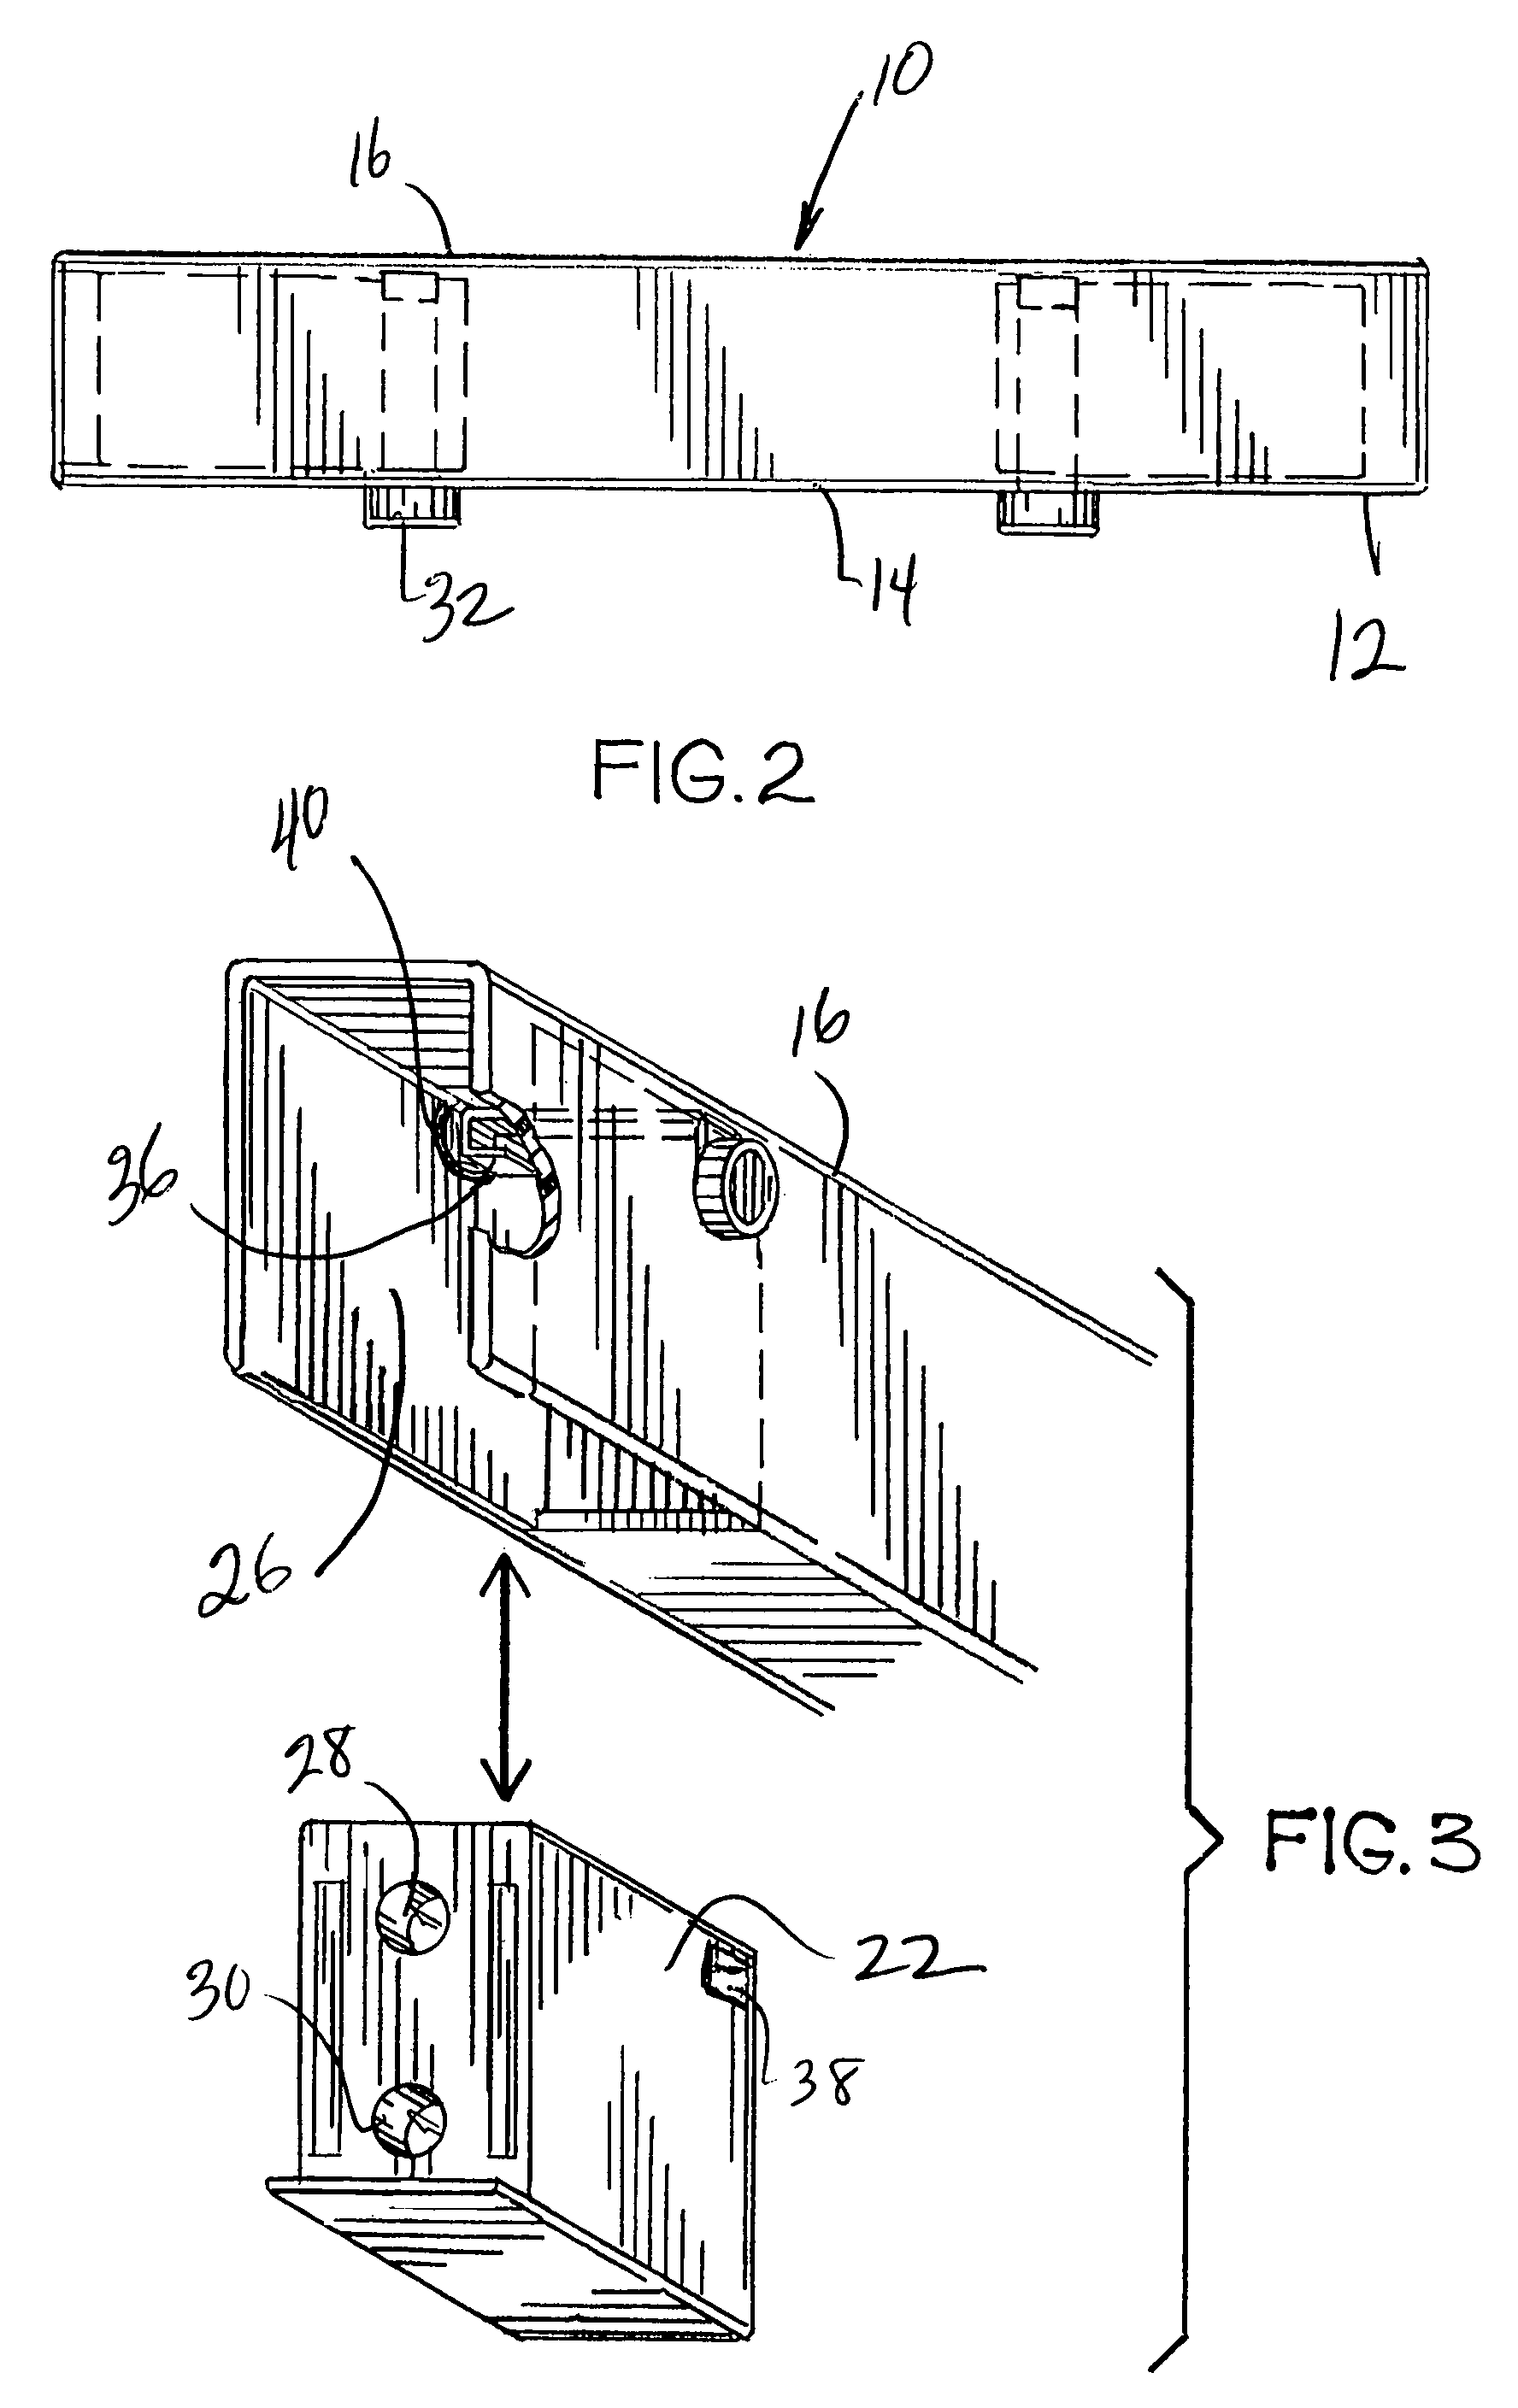 Non-lethal electrical discharge weapon having a bottom loaded cartridge